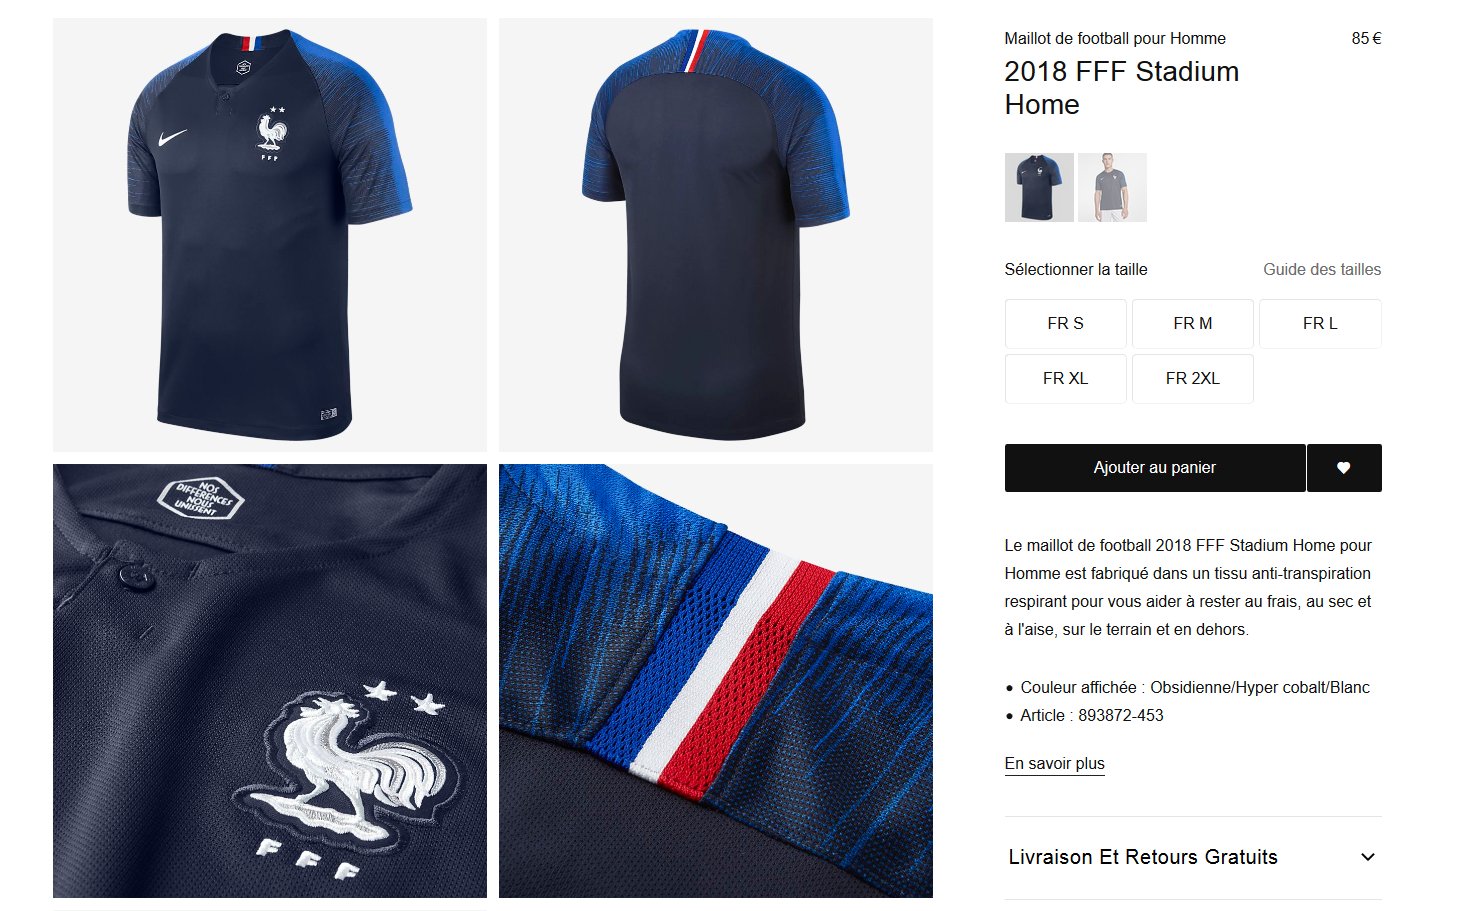 MoreSneakers.com on Twitter: "France Football Shirt FFF Stadium Home now available on Nike EUROPE Don't sleep FR:https://t.co/NQLOS65Gsz UK:https://t.co/bnRn0mbiAI DE:https://t.co/1p8nELyM3q https://t.co/VqPNKx9o8l" / Twitter